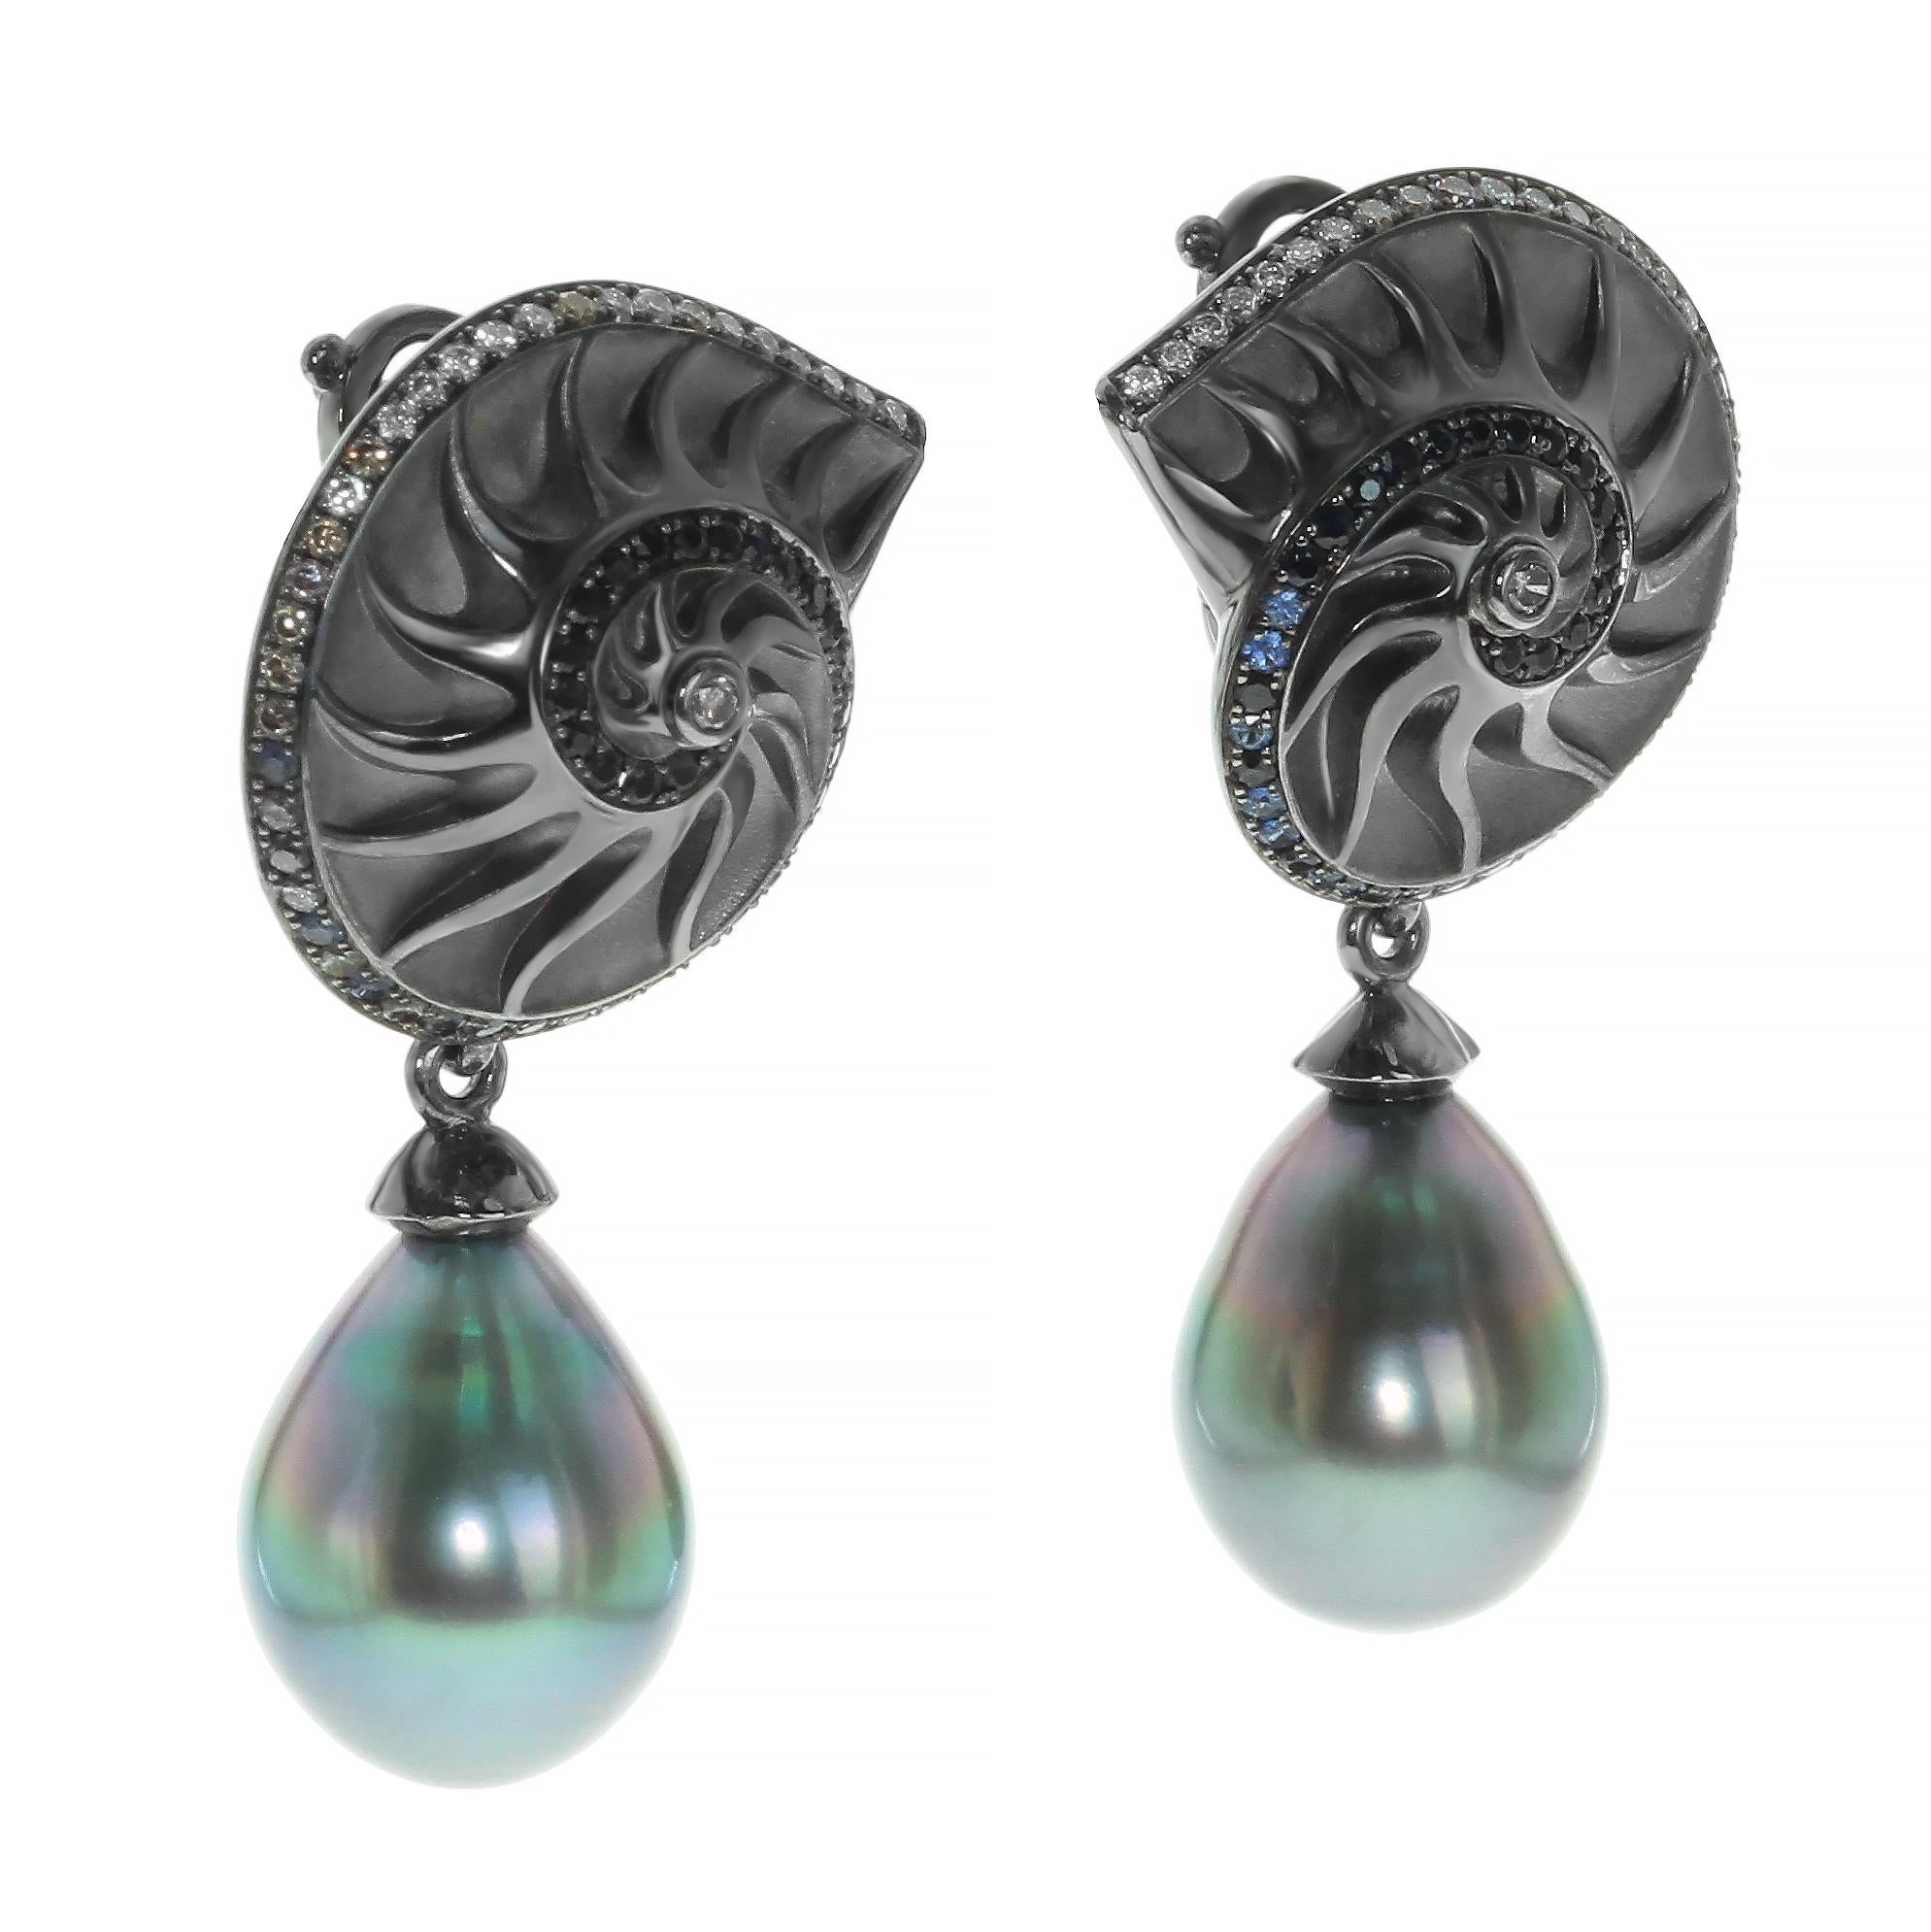 Diamond Sapphire Tahiti Pearl 18 Karat Black Gold Seashell Earrings

Did You ever seen the mystycal deepness of the ocean? Did You ever meet inhabitants of it? Mousson Atelier will opend this part of unseen especially for You! Delicate Ammonite